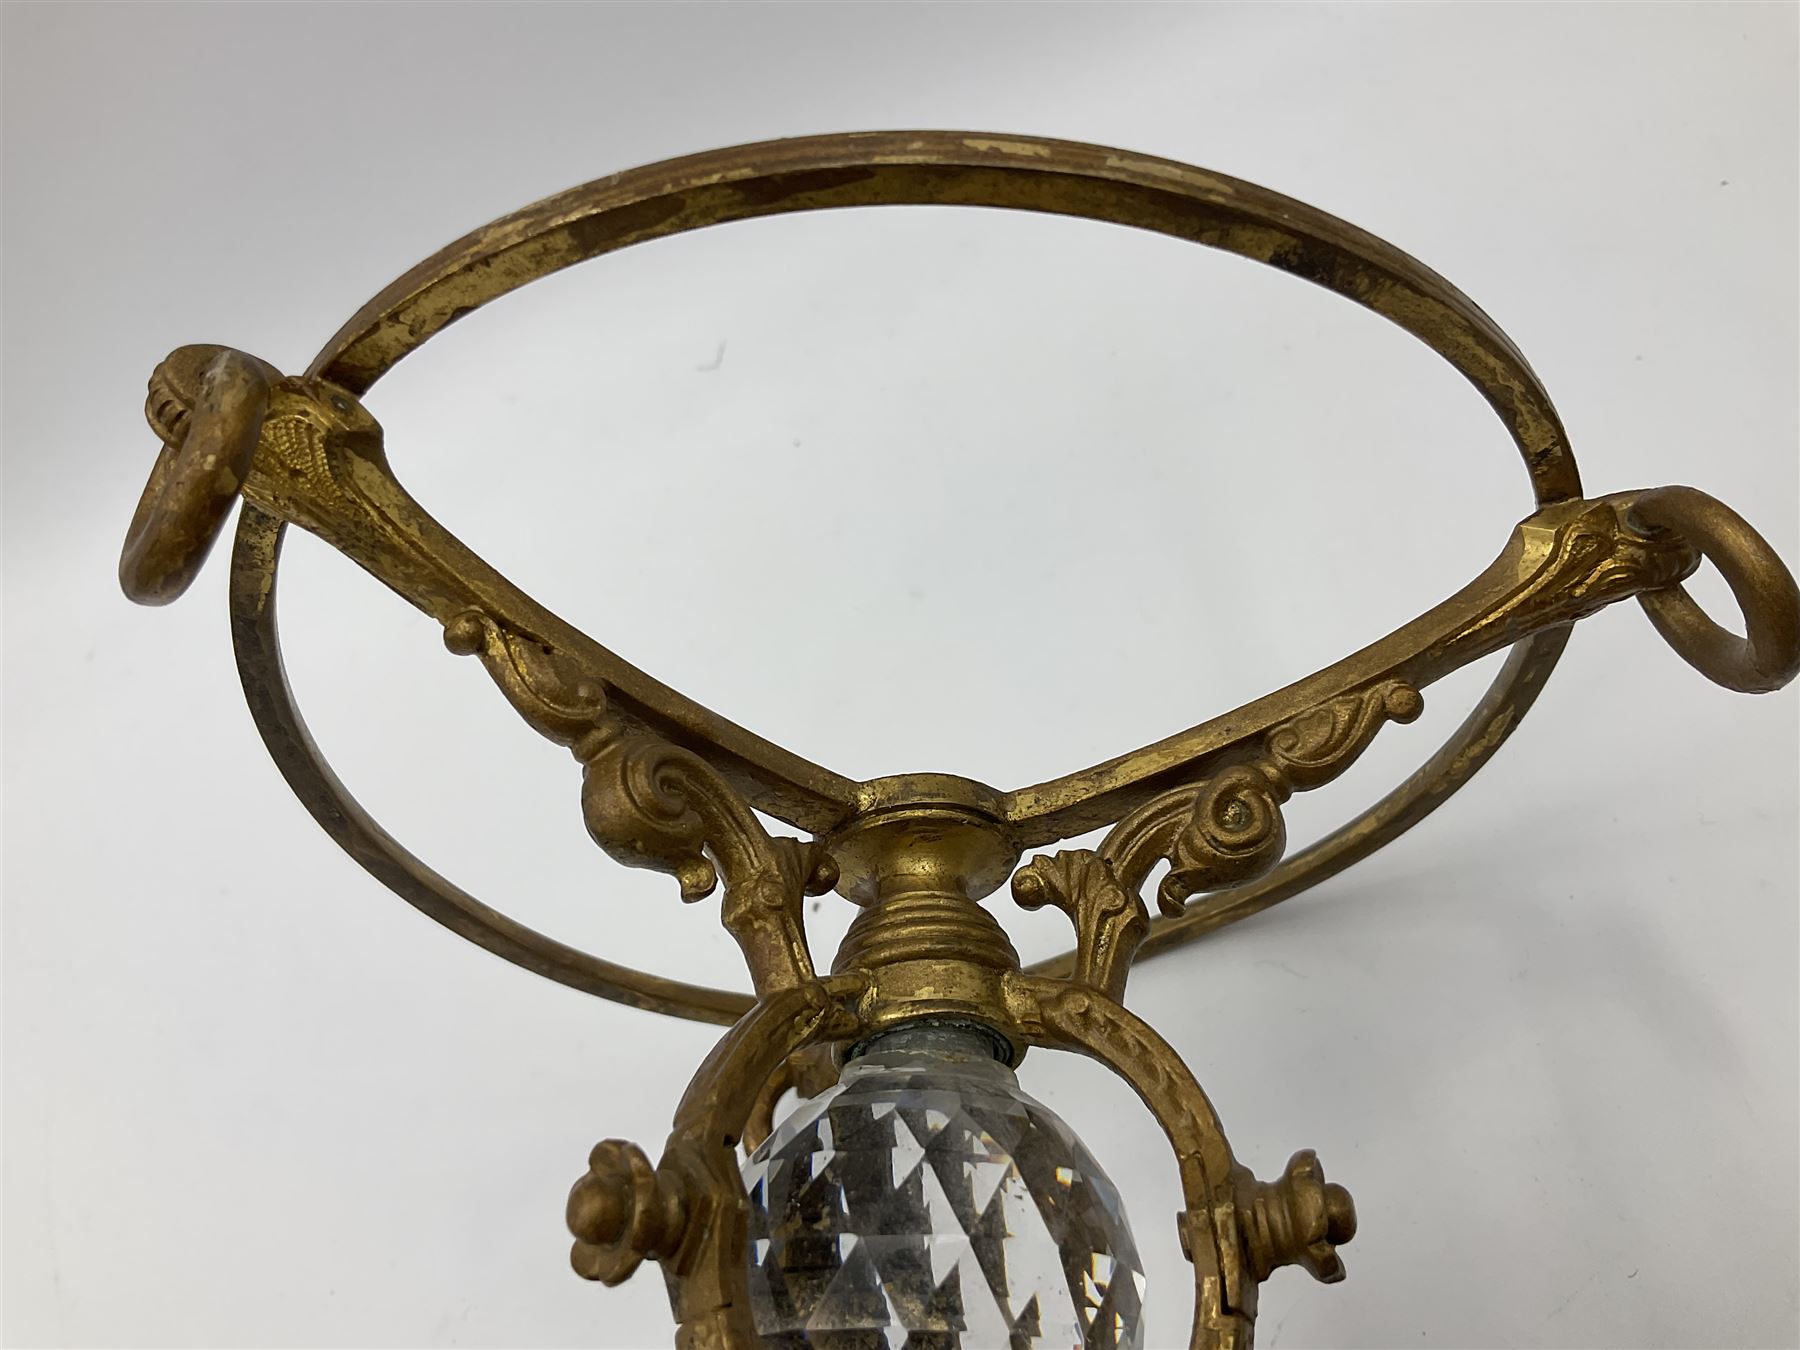 Pair of 19th century Osler glass and ormolu table centrepieces - Image 24 of 30